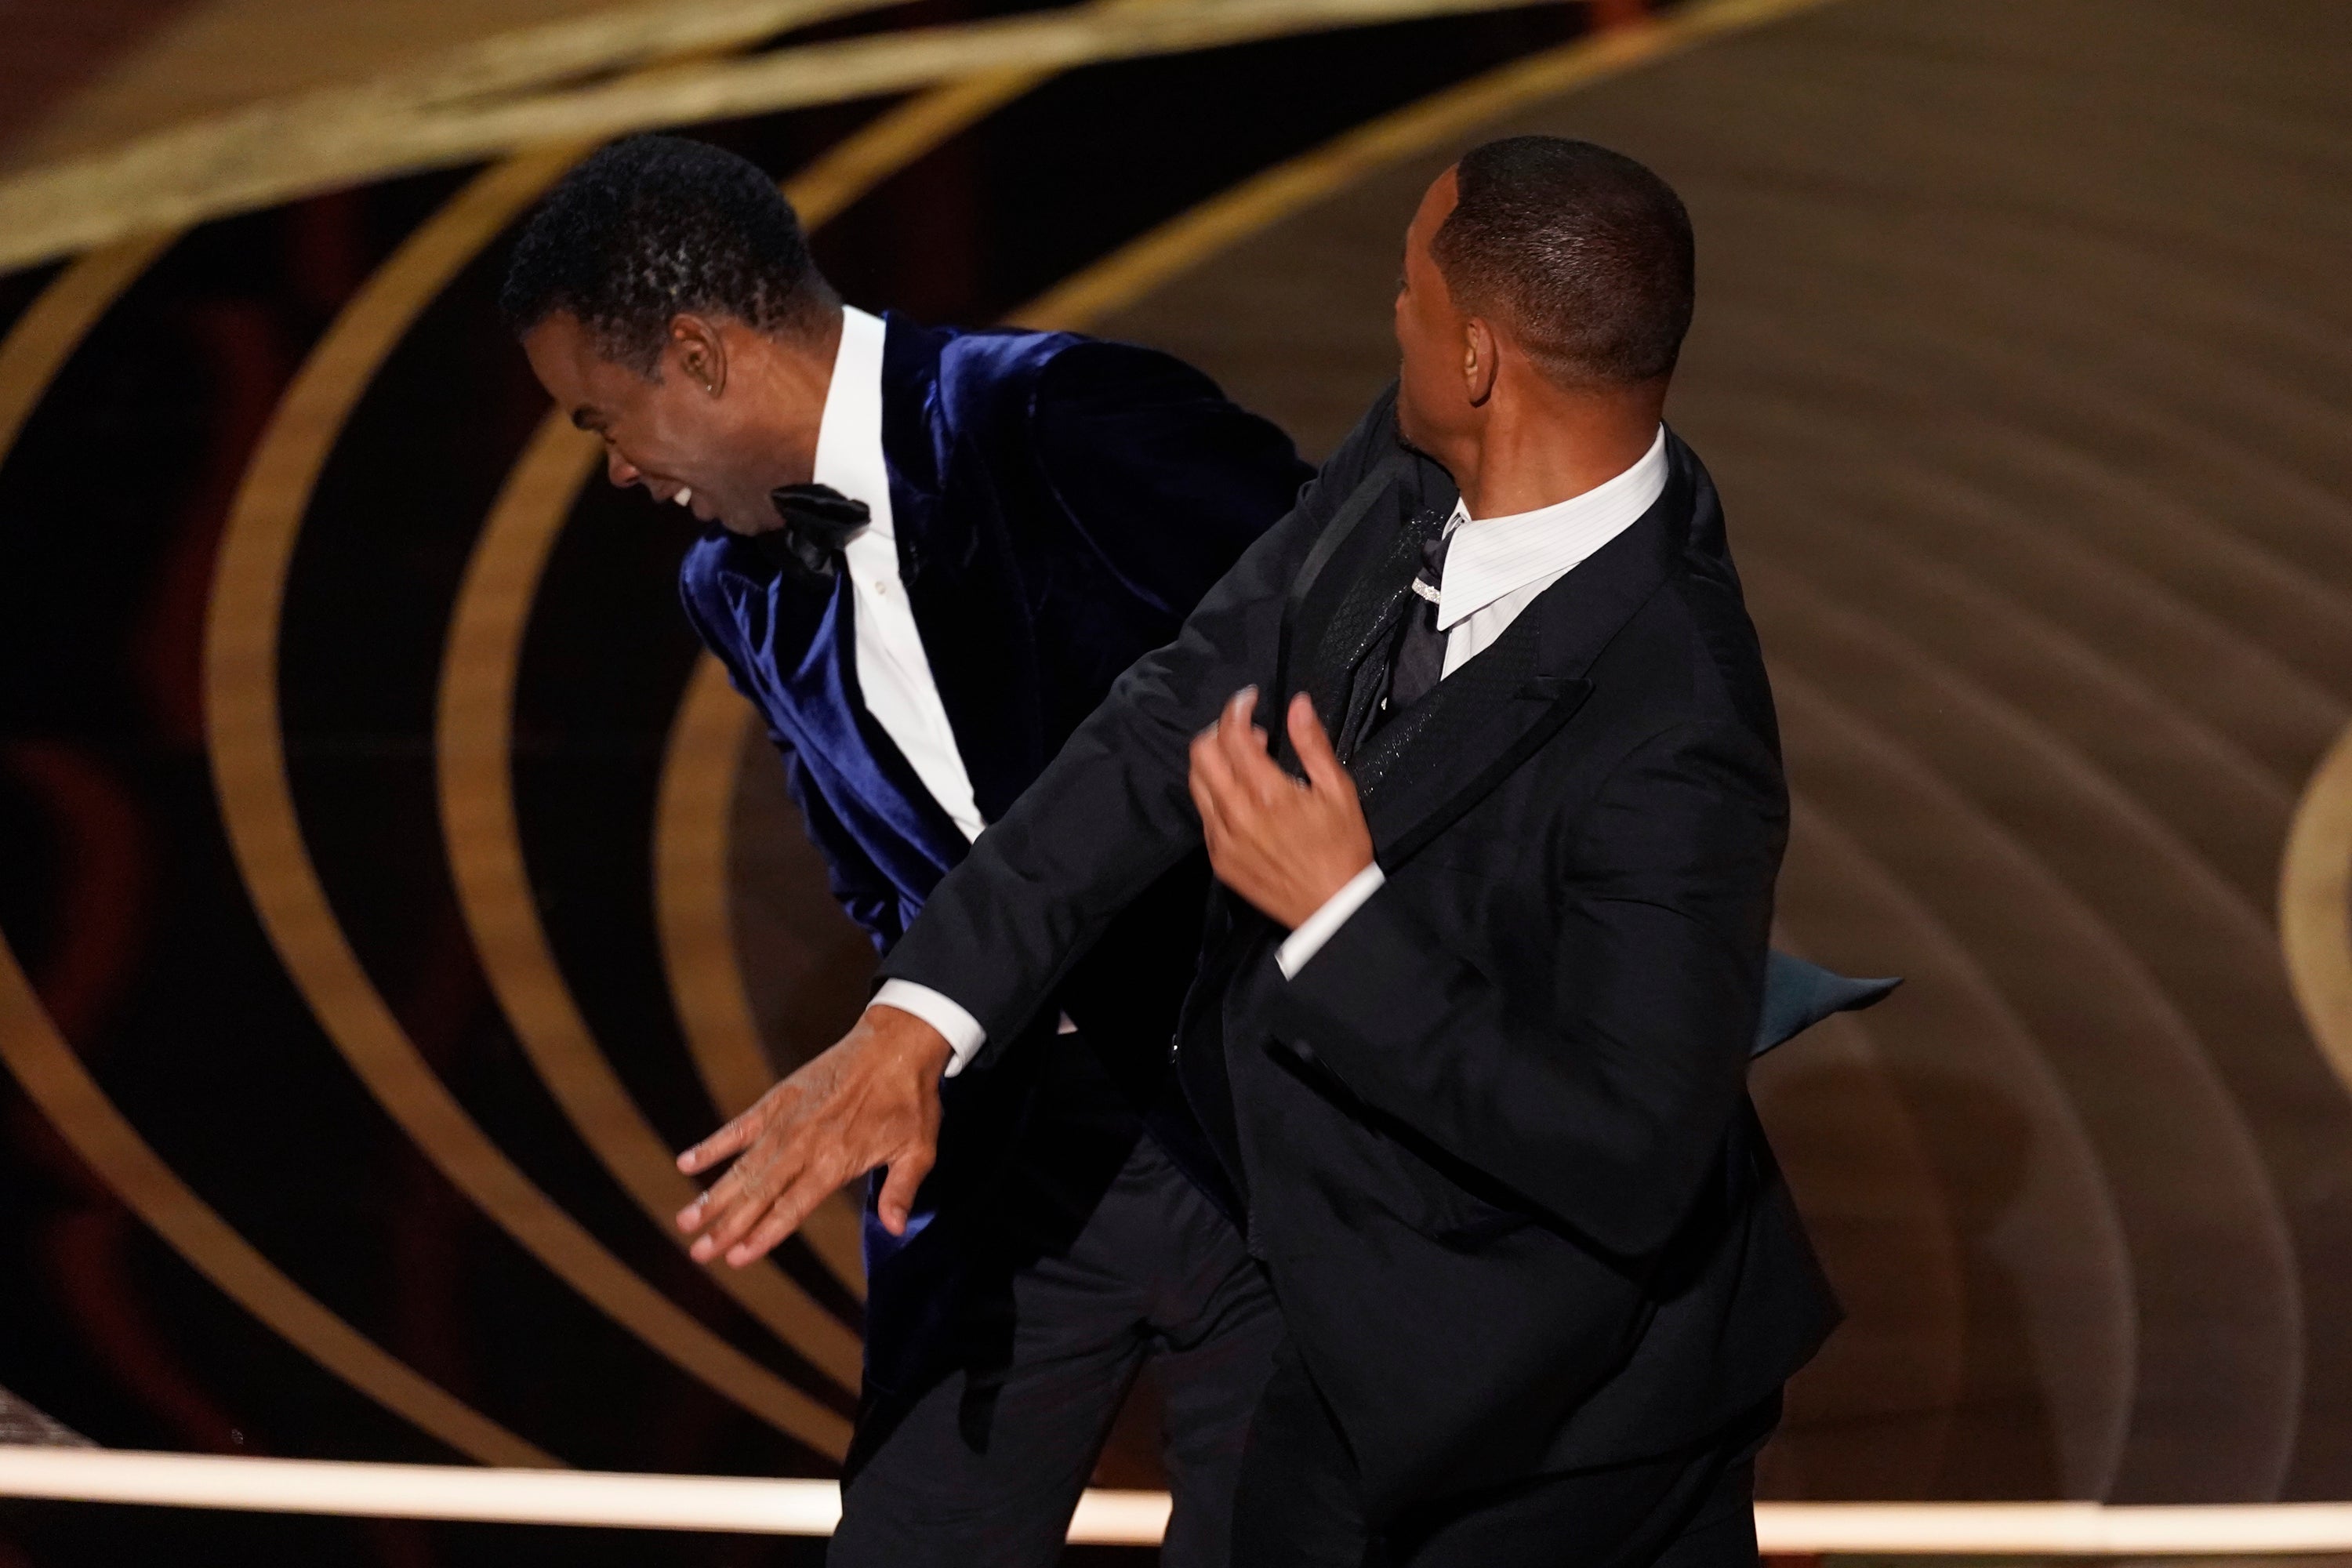 Will Smith slapped Chris Rock on stage at the Oscars ceremony last Sunday